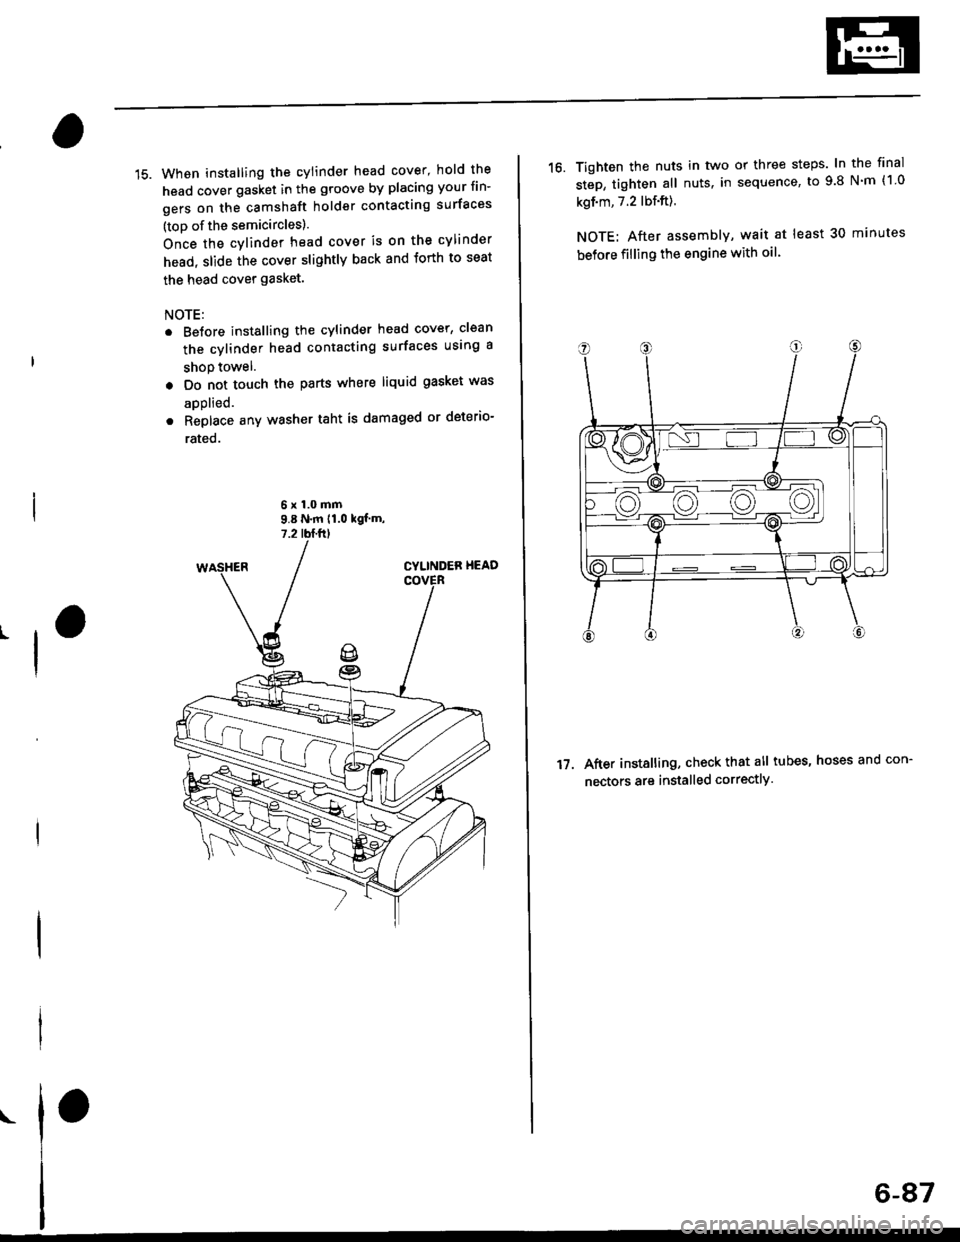 HONDA CIVIC 1996 6.G Service Manual 15. When installing the cylinder head cover, hold the
head cover gasket in the groove by placing your fin-
gers on the camshaft holder contacting surfaces
(toD of the semicircles).
Once the cylinder h